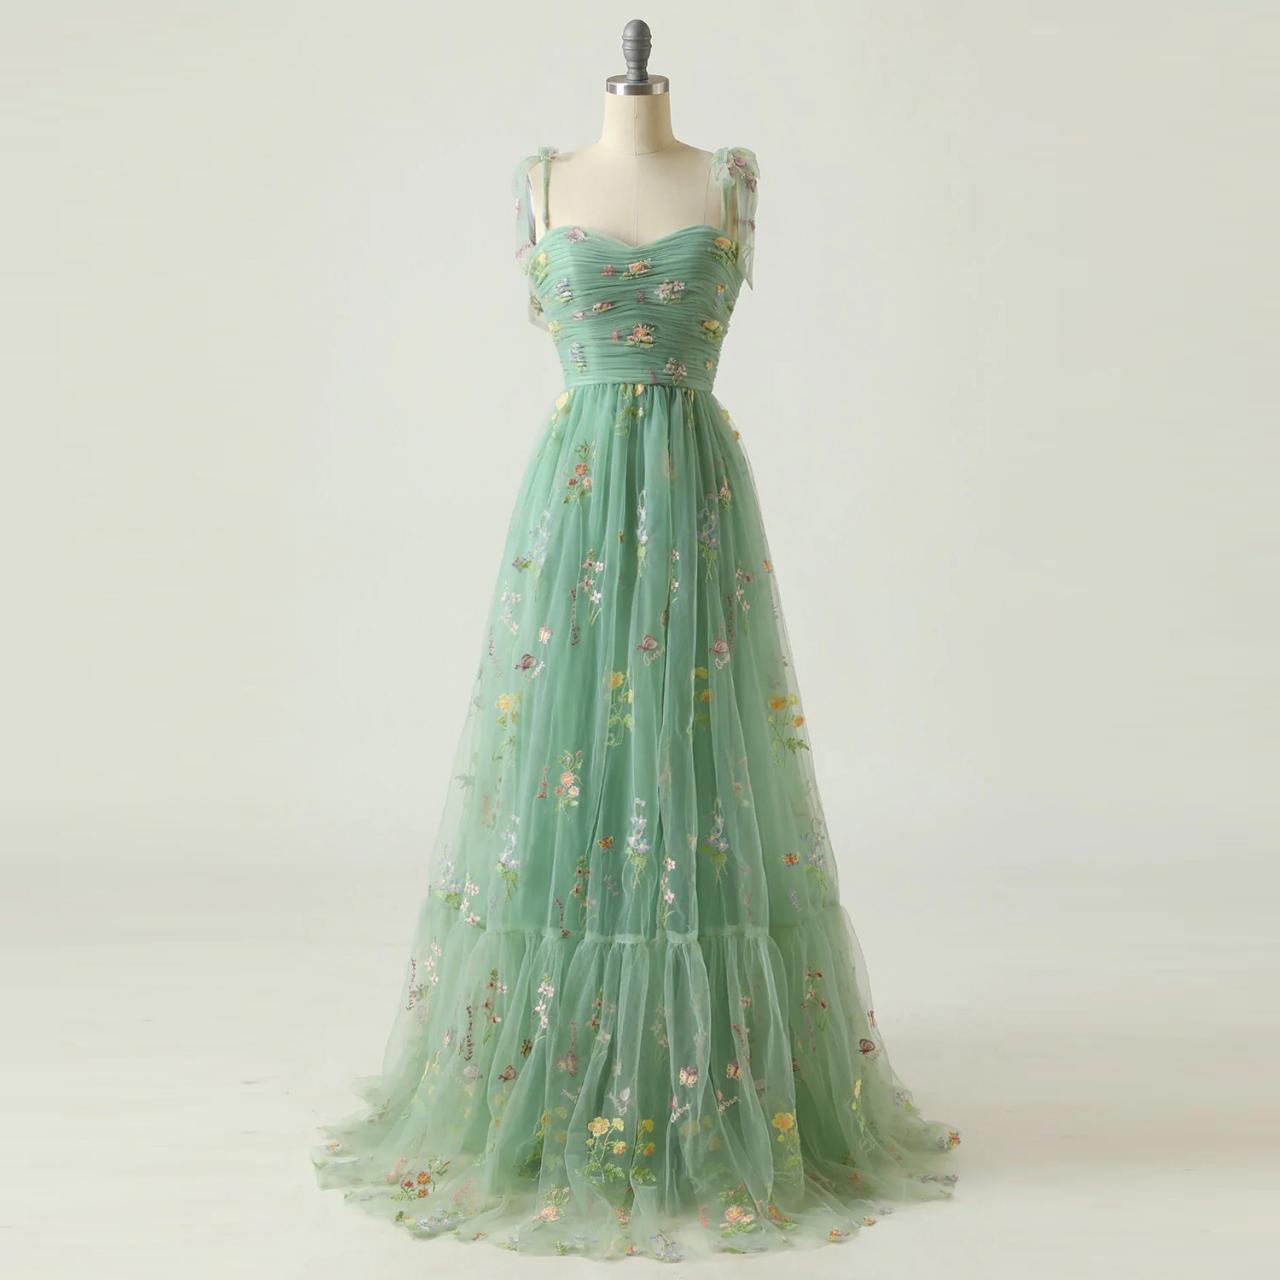 Spaghetti Strap Light Green Embroidered Prom Dress Chic Party Dress